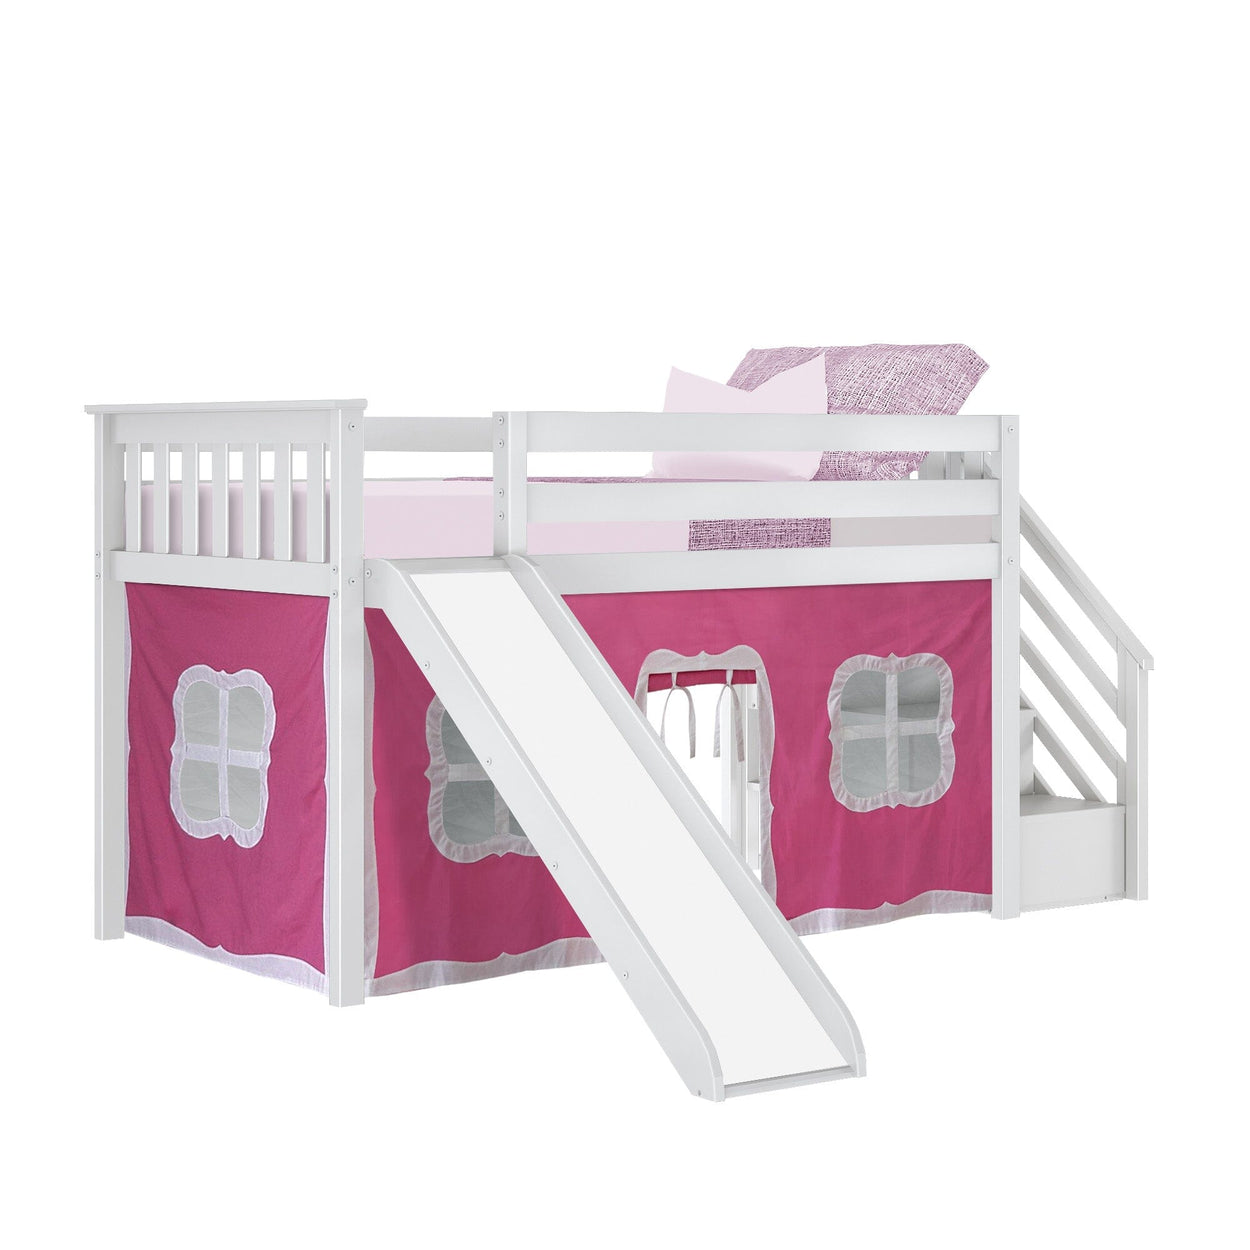 180225002078 : Loft Beds Twin Low Loft with Stairs and Slide with Curtains, White + Pink Curtain